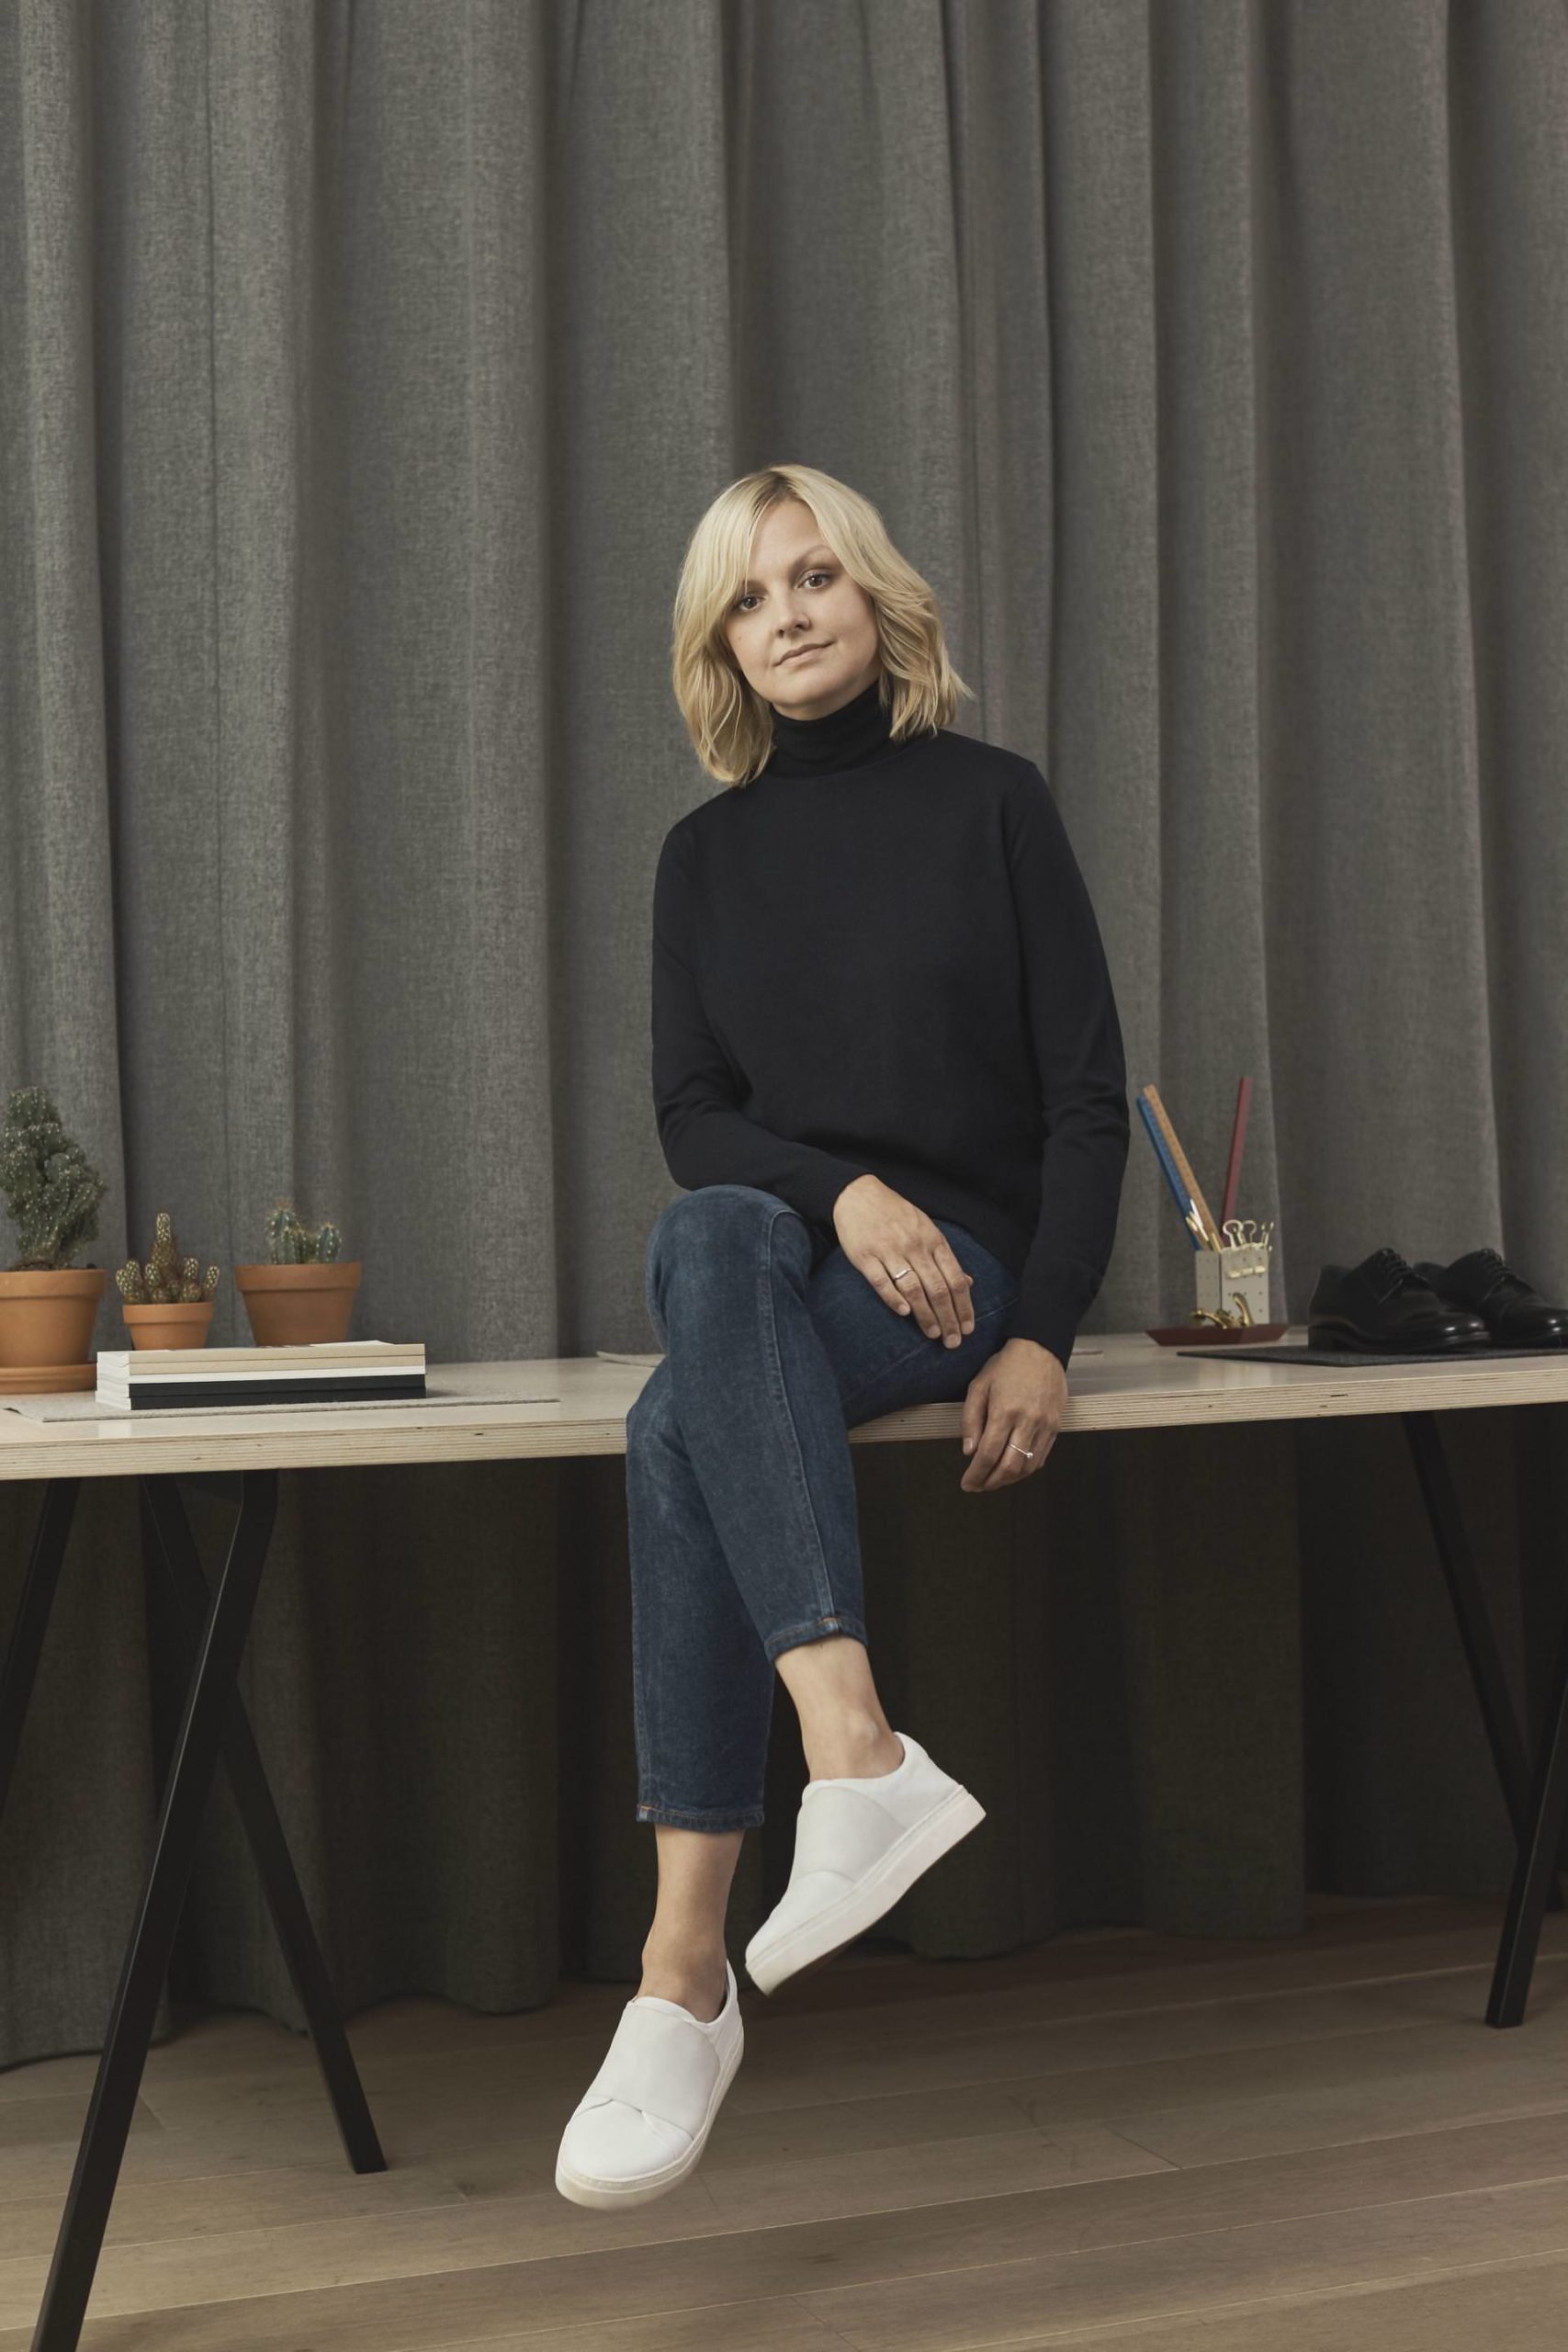 How Cos Creative Director Karin Gustafsson Developed the Brand's Minimalist  Aesthetic - Fashionista